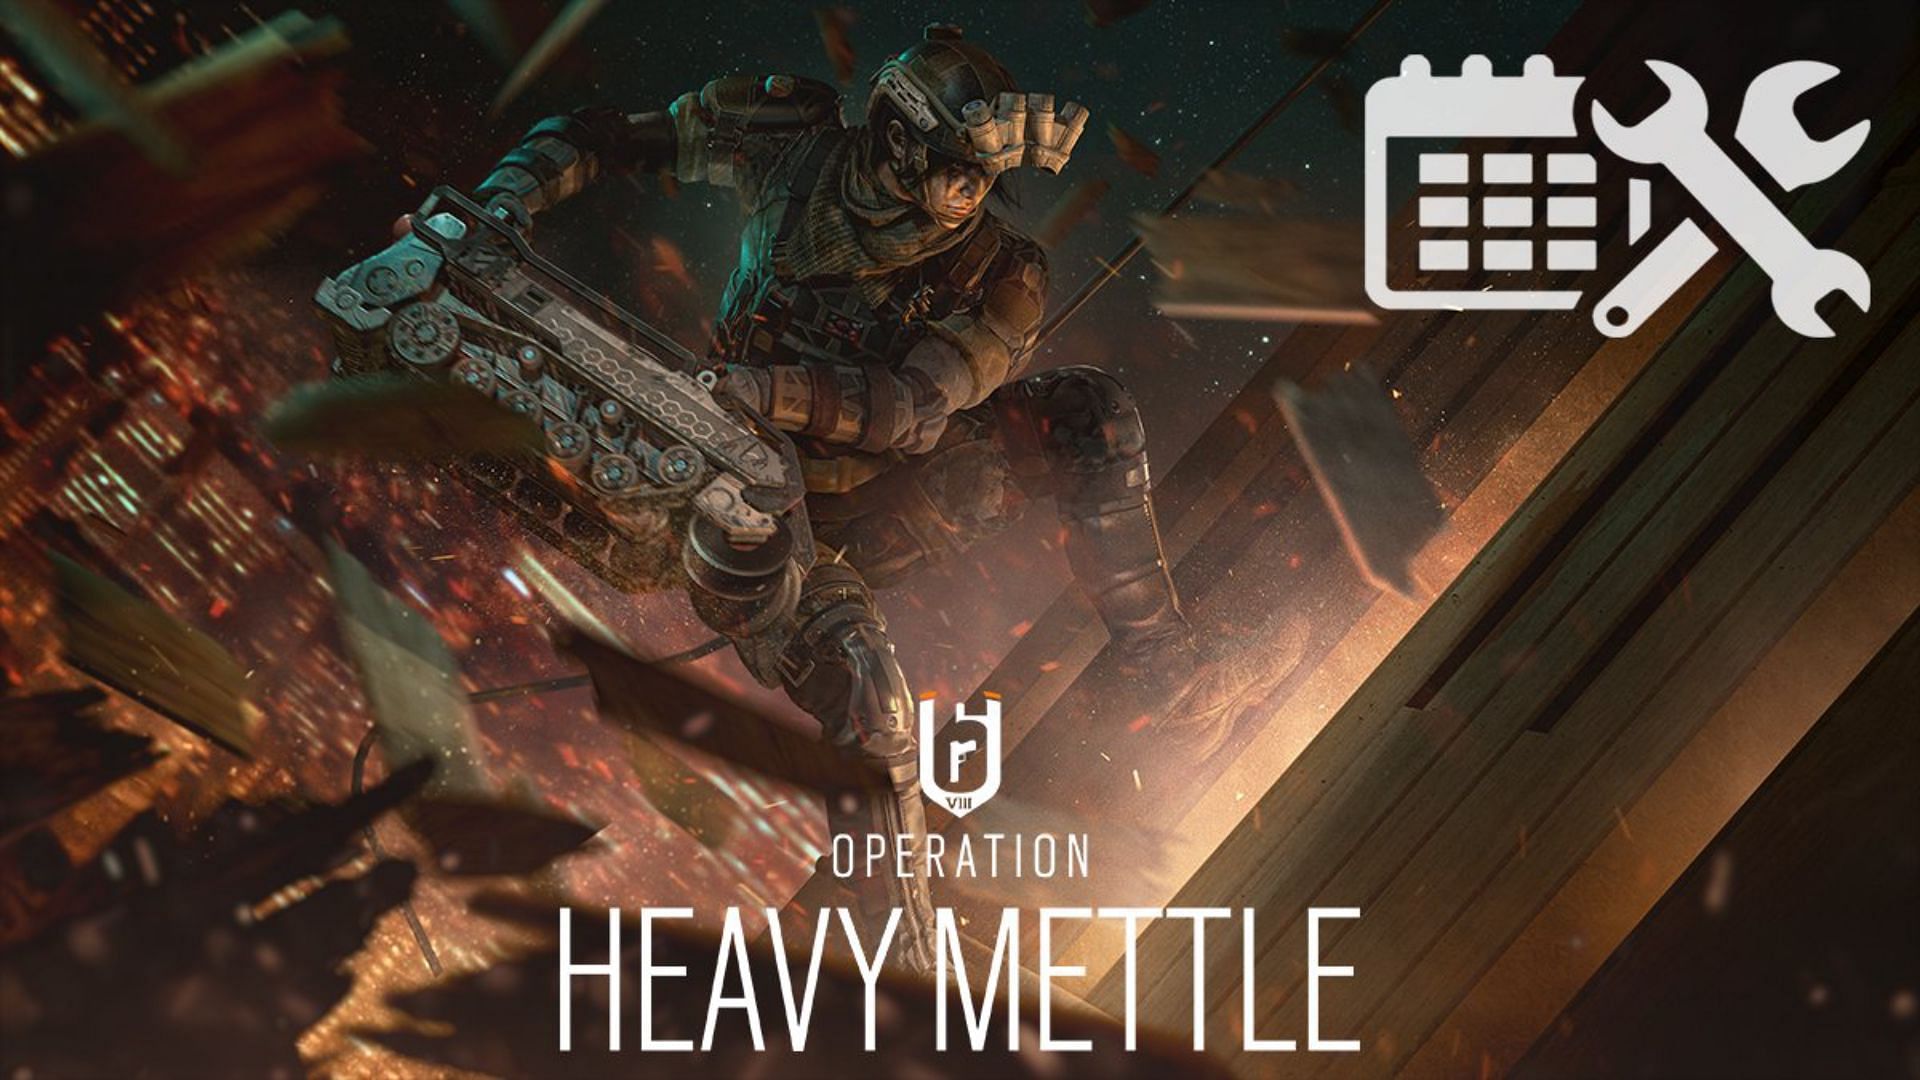 Rainbow Six Siege Operation Heavy Mettle Y8S2.2 patch notes